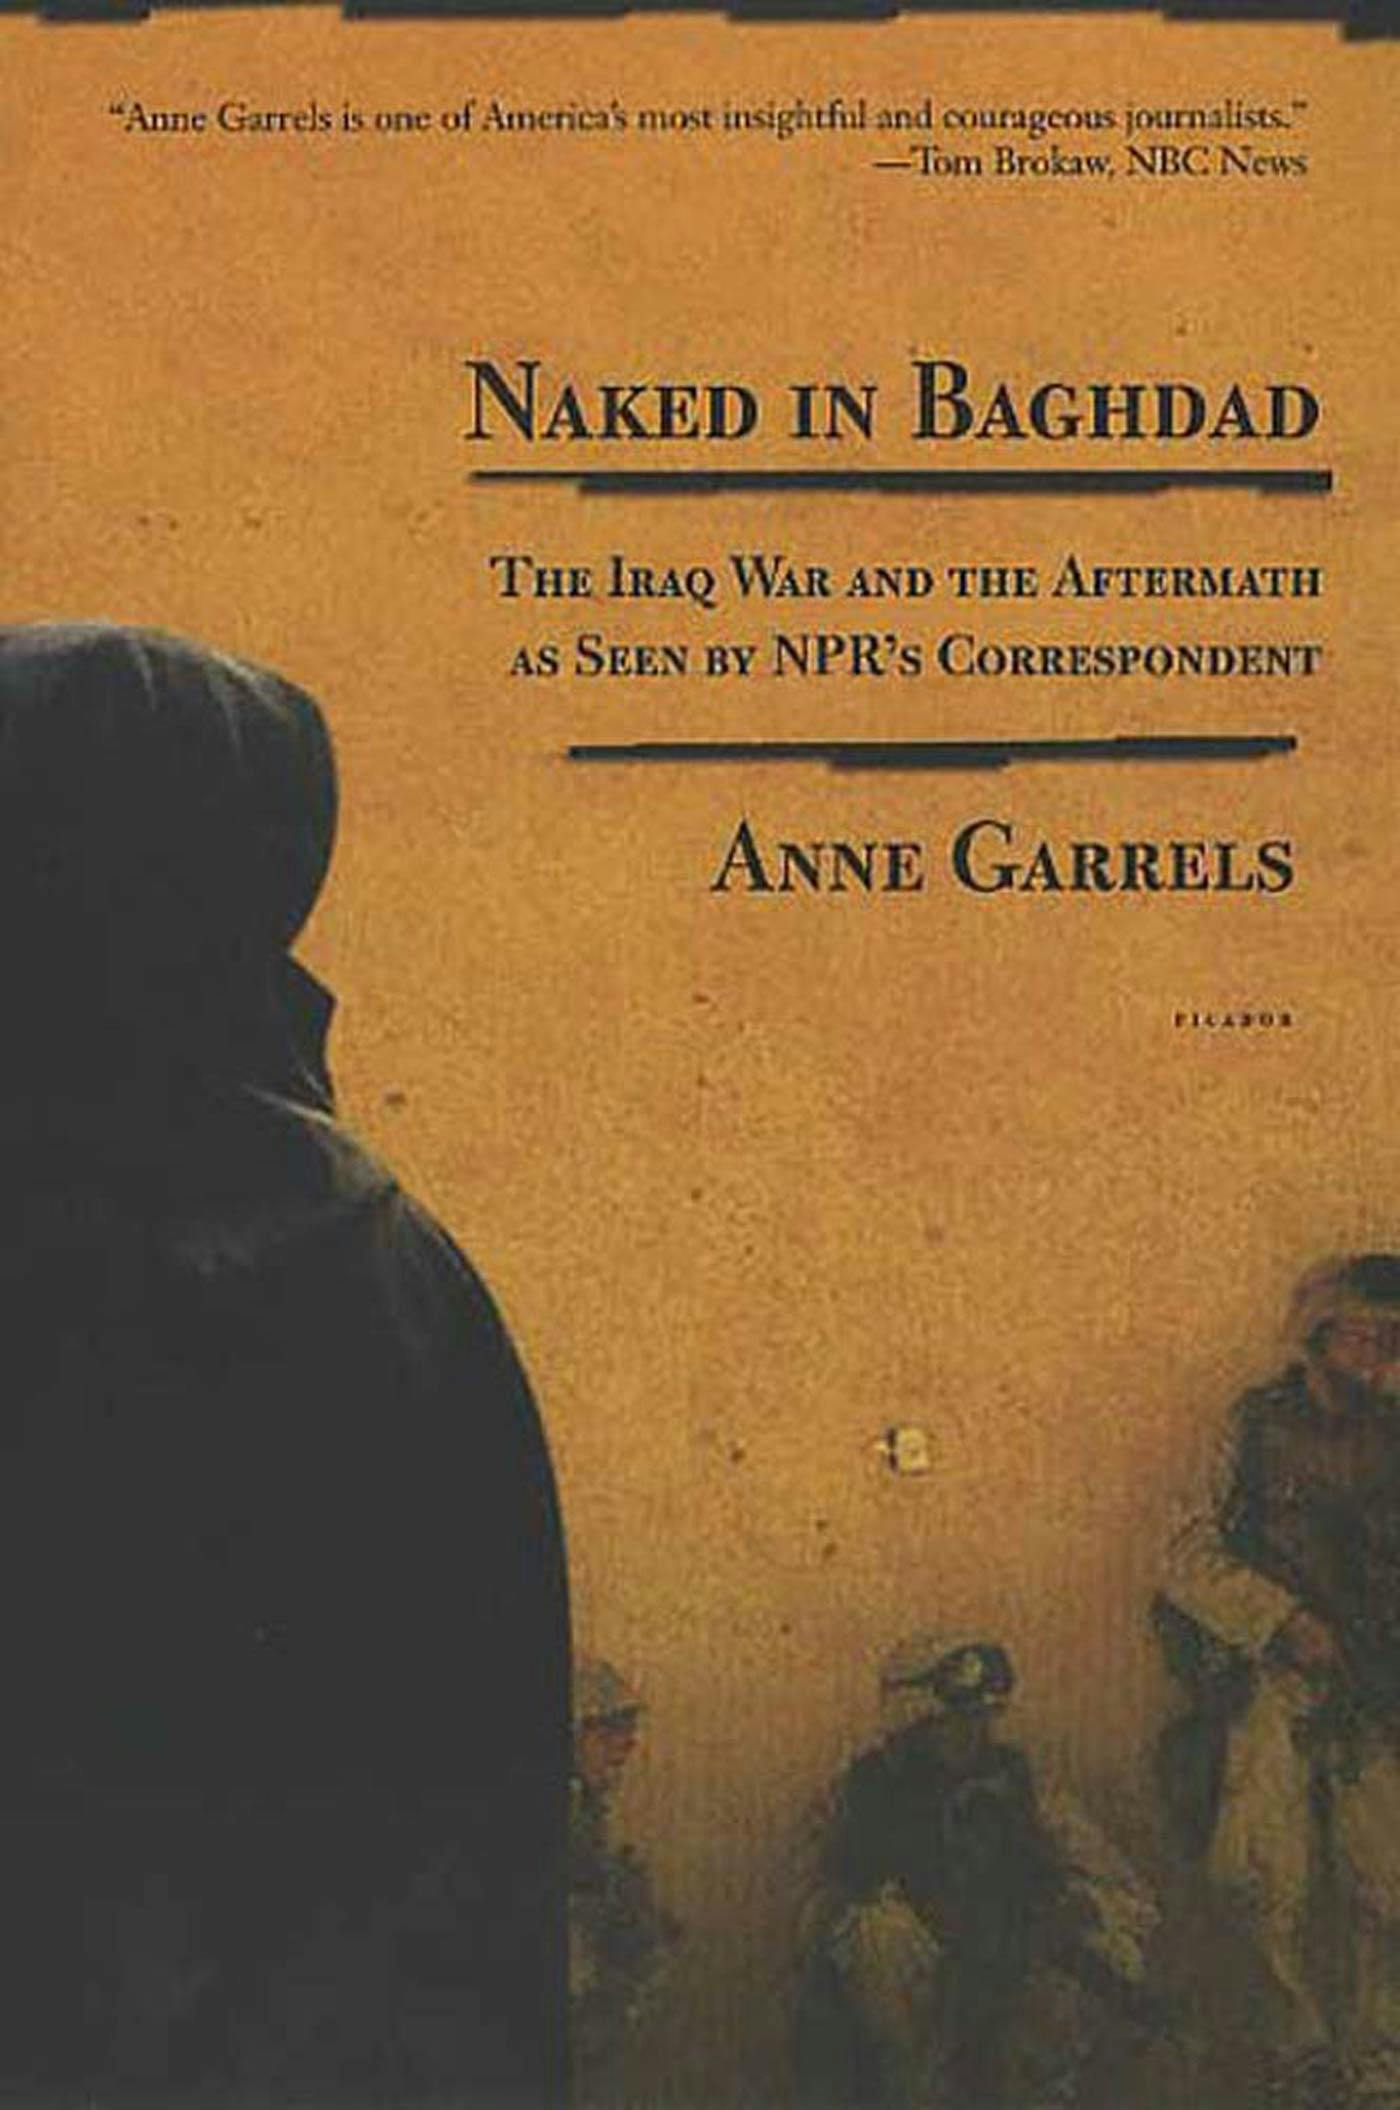 Dead or alive nude in Baghdad